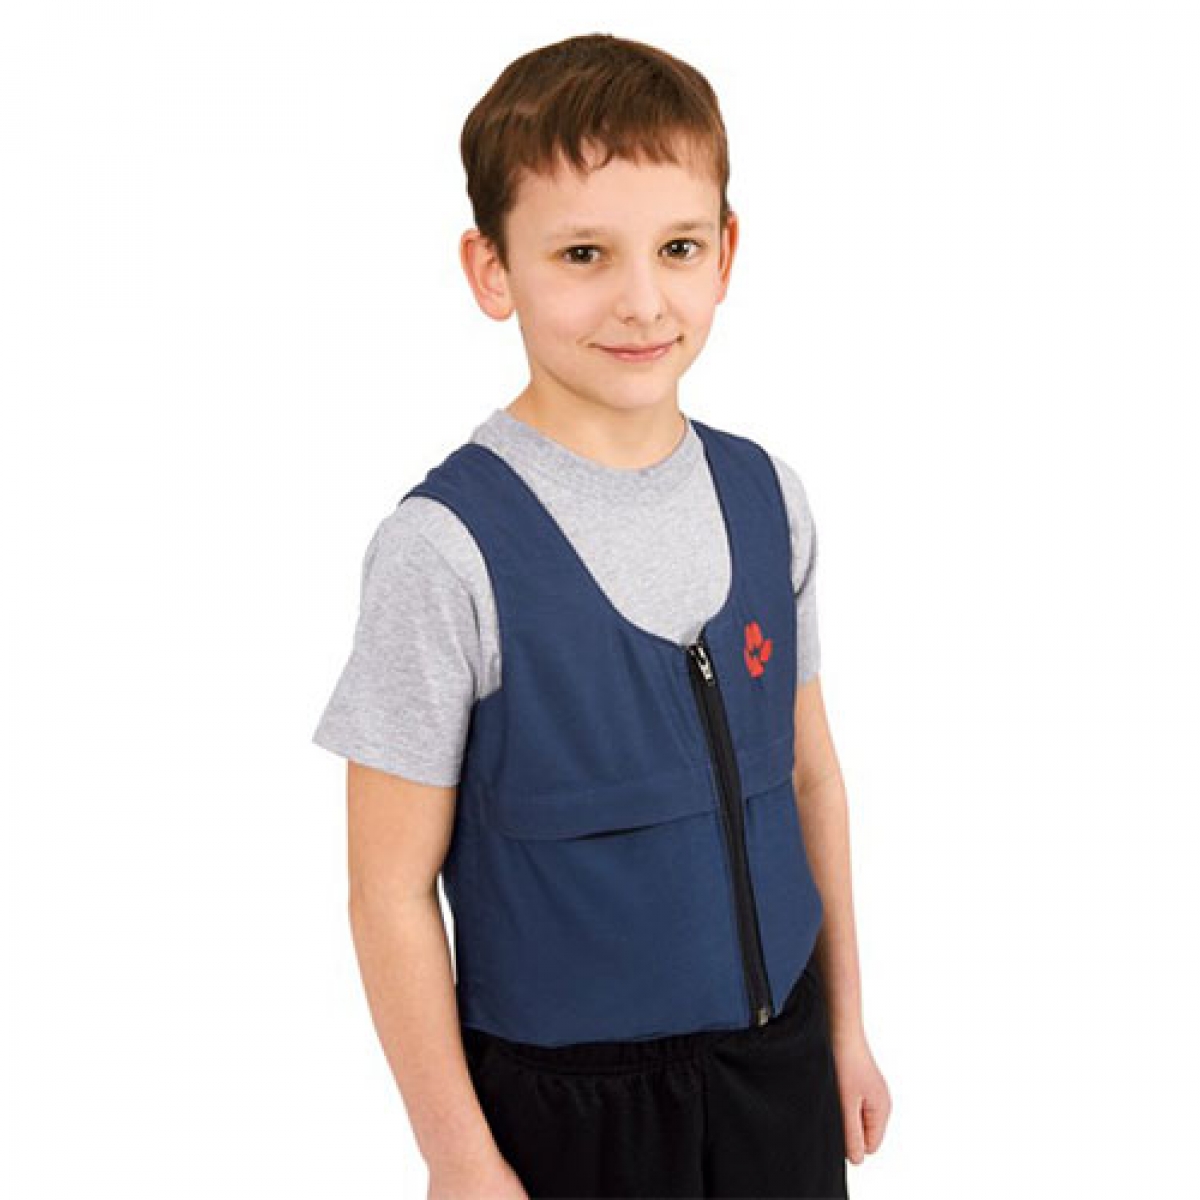 Weighted Vests Wear